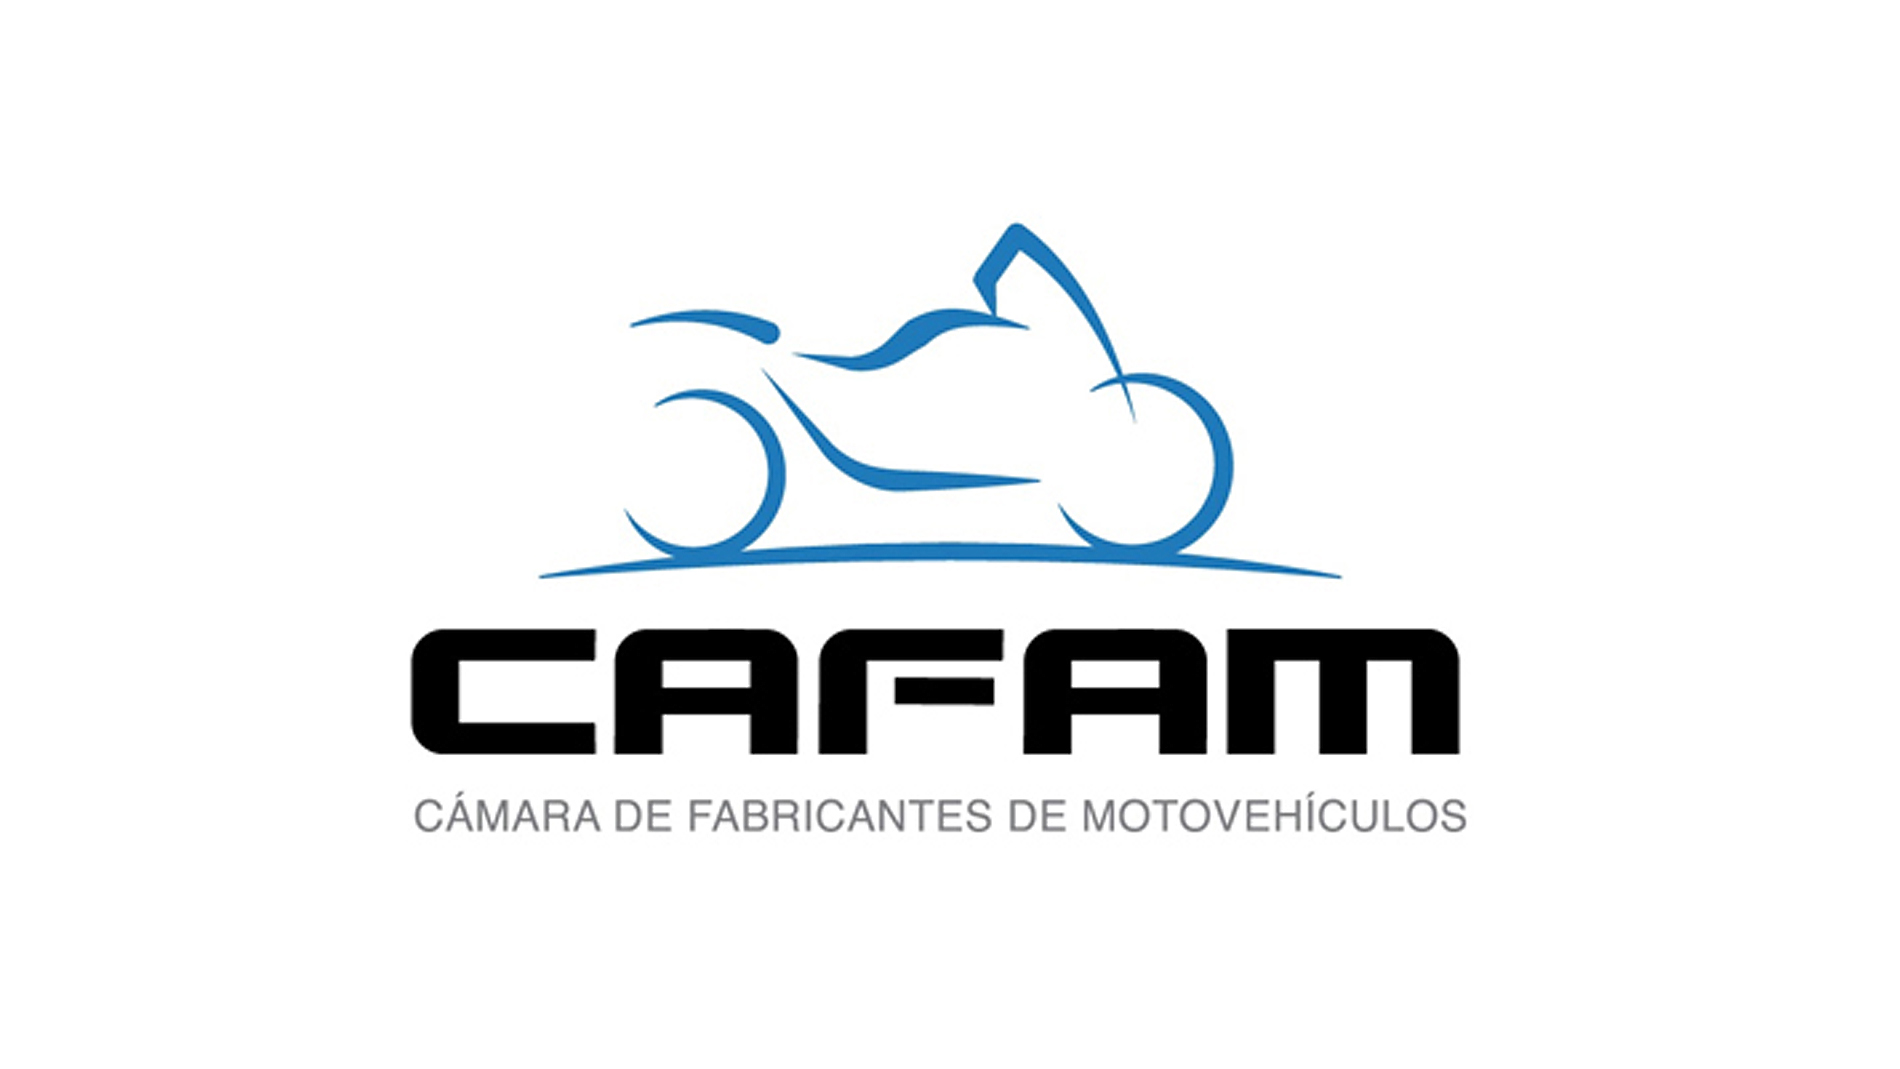 CAFAM - Chamber of Motorcycle Manufacturers